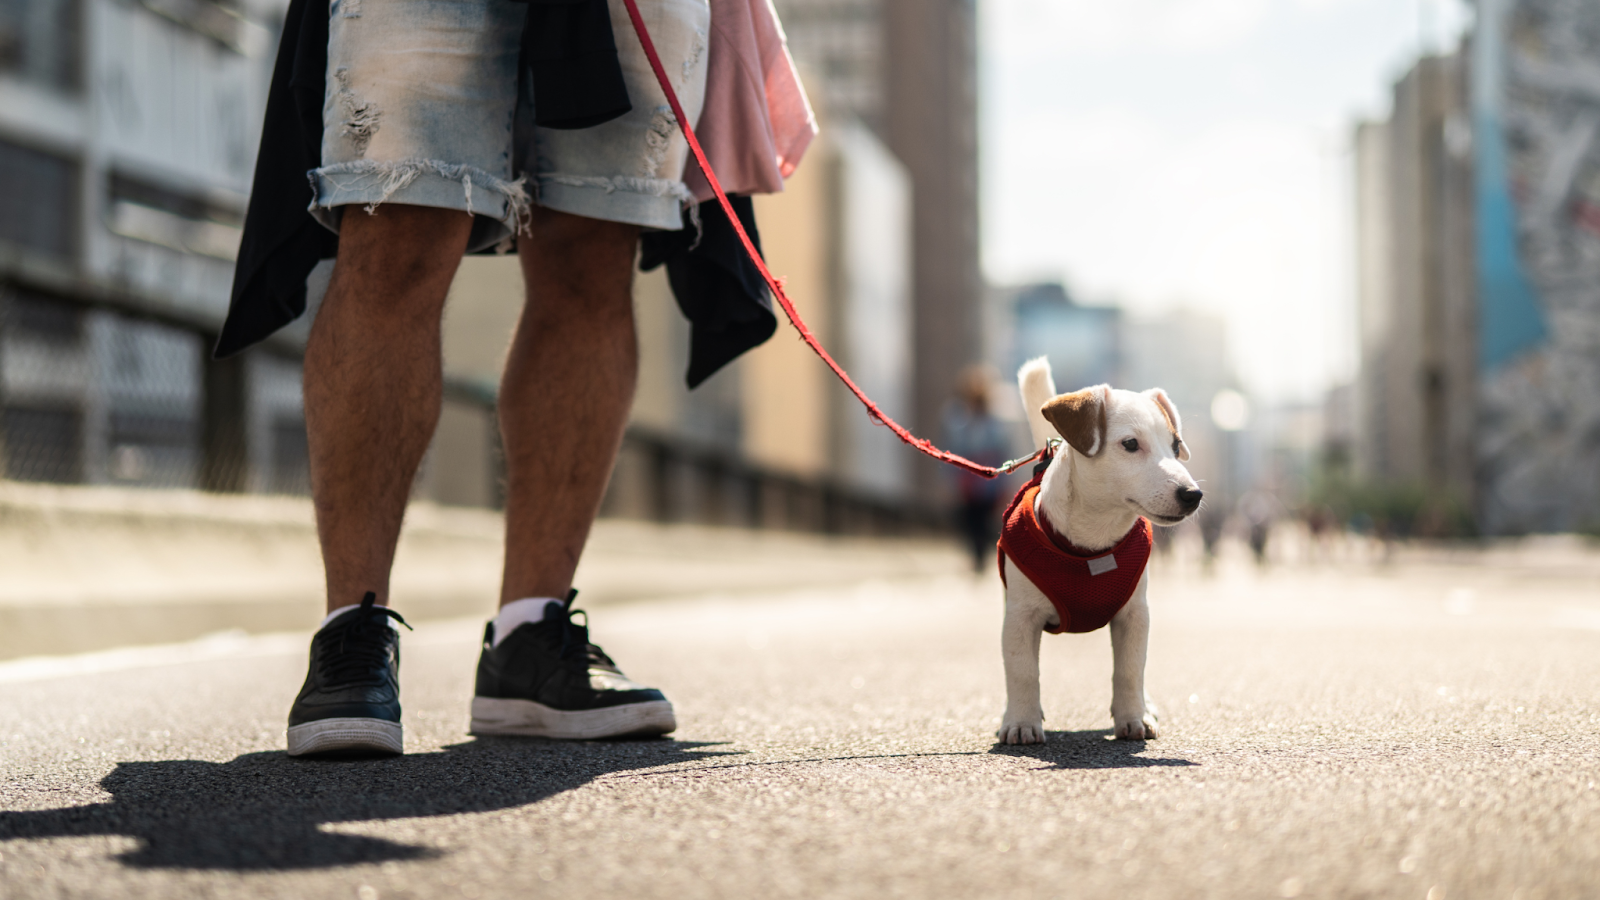 The ideal temperature for humans and dogs to walk is 75 degrees Fahrenheit.